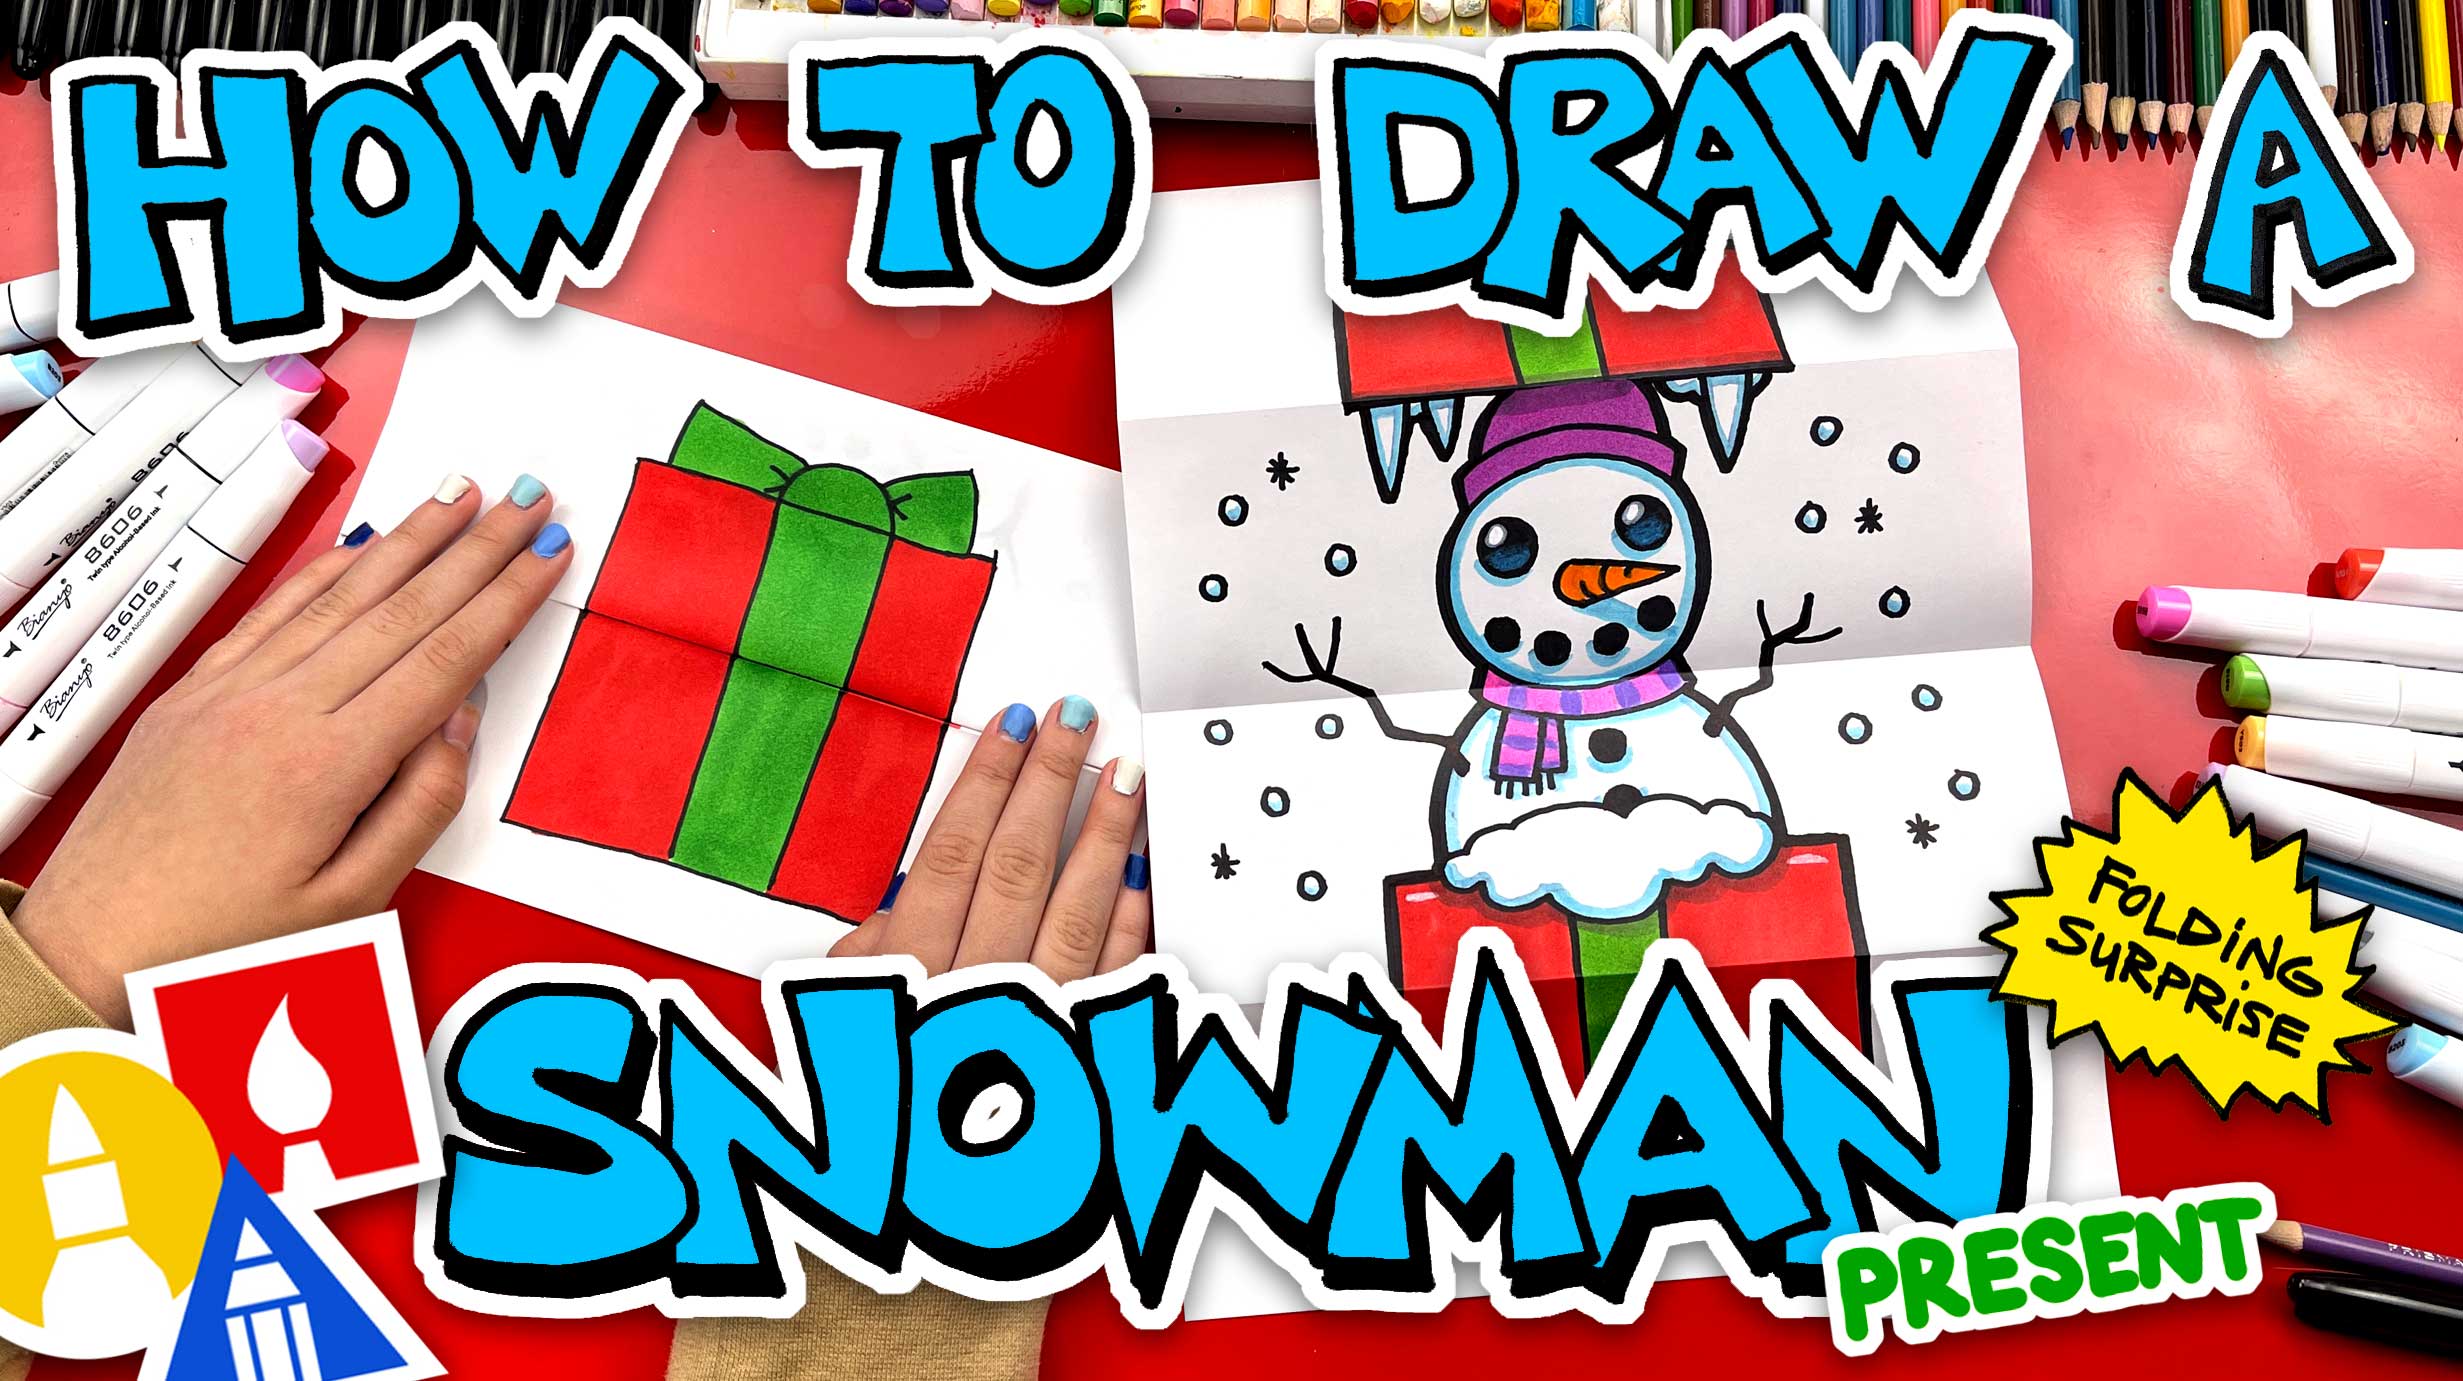 How To Draw A Snowman In A Present Folding Surprise Art For Kids Hub